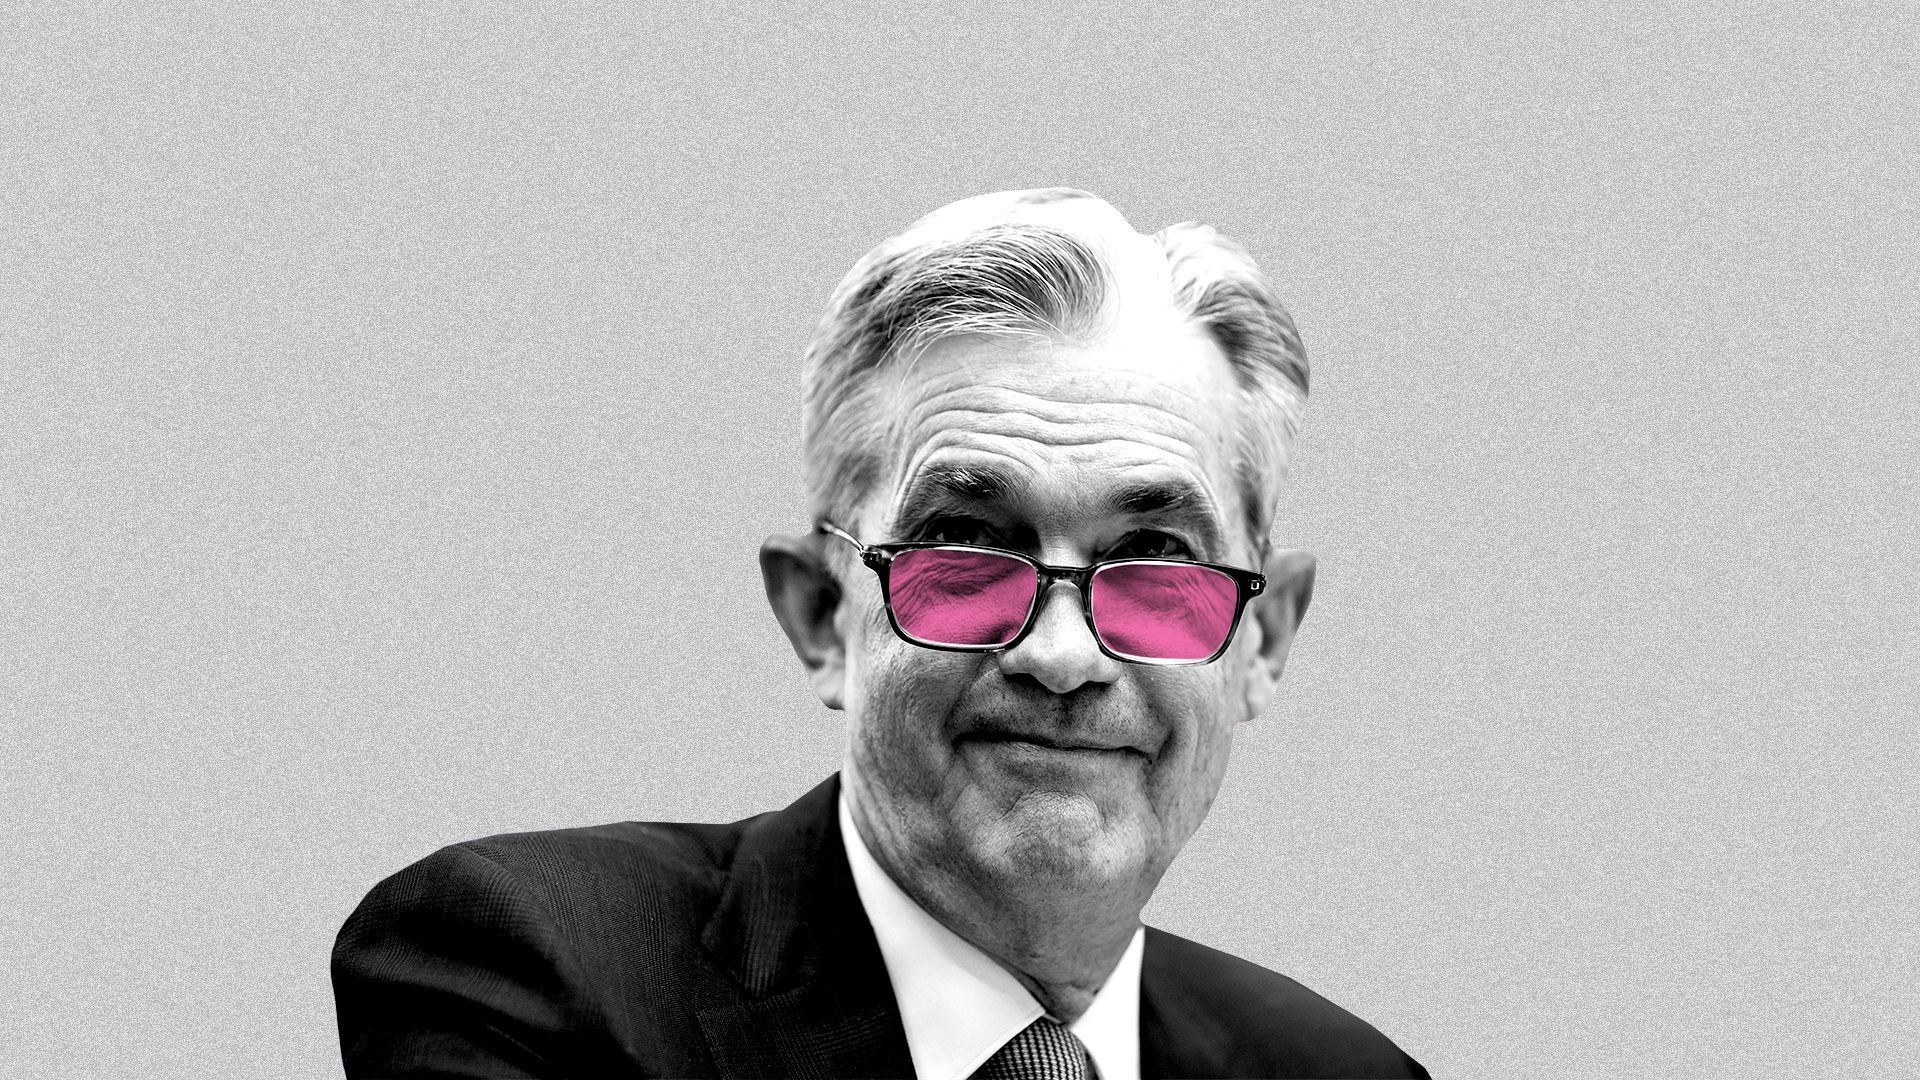 Photo illustration of Jerome Powell with rose-colored glasses on.